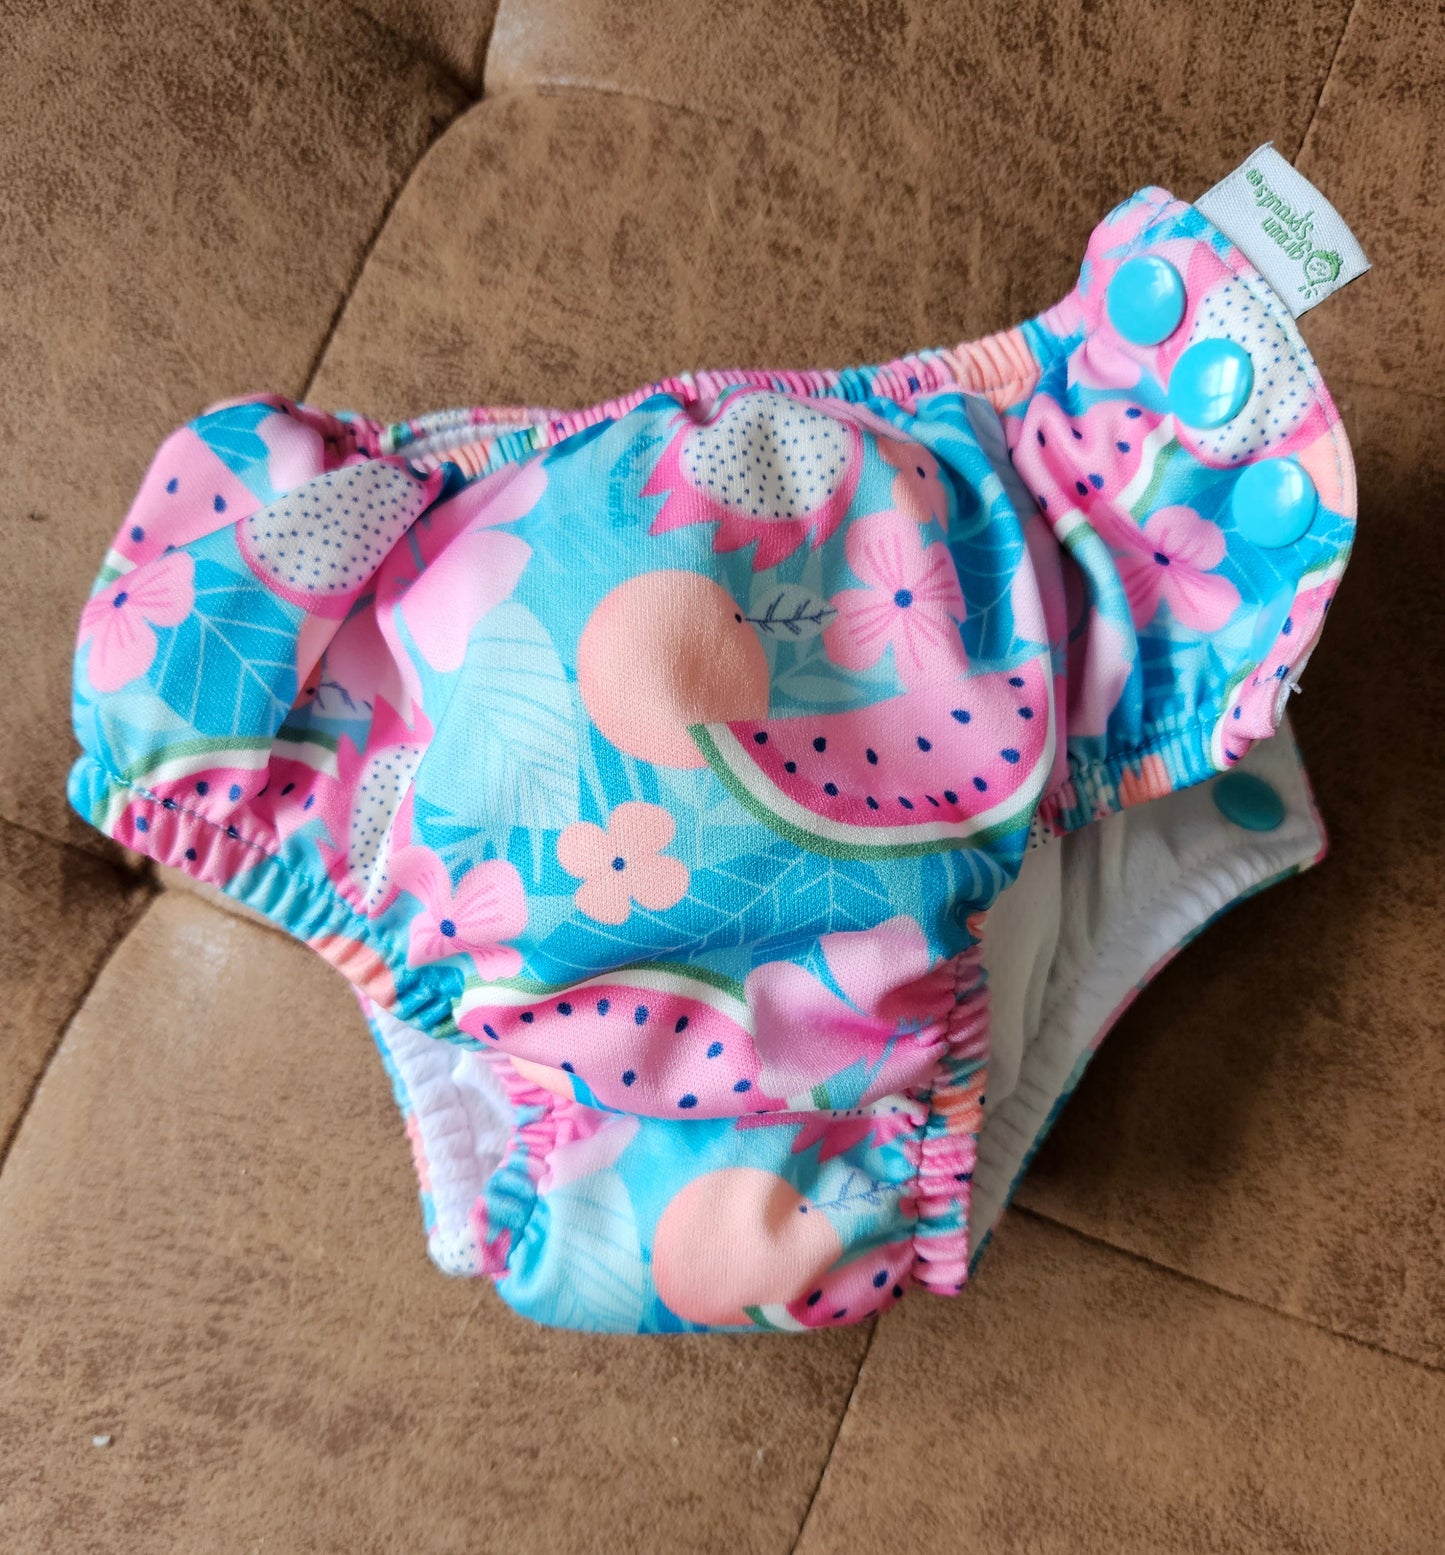 12 month Green Sprouts pink and blue reusable swim diaper